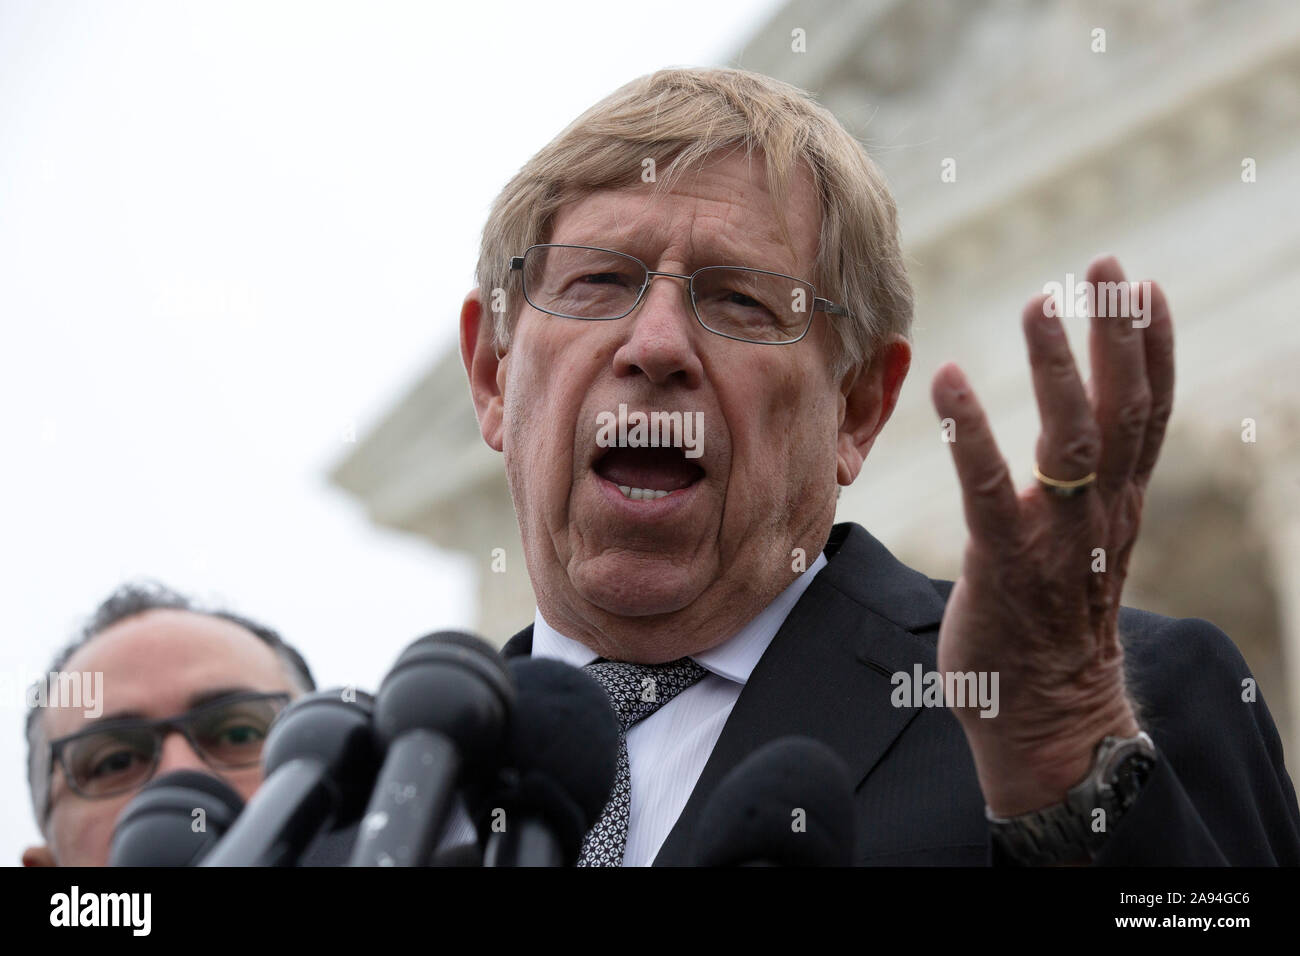 Washington, United States Of America. 12th Nov, 2019. Former United States Solicitor General Ted Olson speaks to the press after the Supreme Court heard arguments on the Deferred Action for Childhood Arrivals program in Washington, DC, U.S. on Tuesday, November 12, 2019. Credit: Stefani Reynolds/CNP | usage worldwide Credit: dpa/Alamy Live News Stock Photo